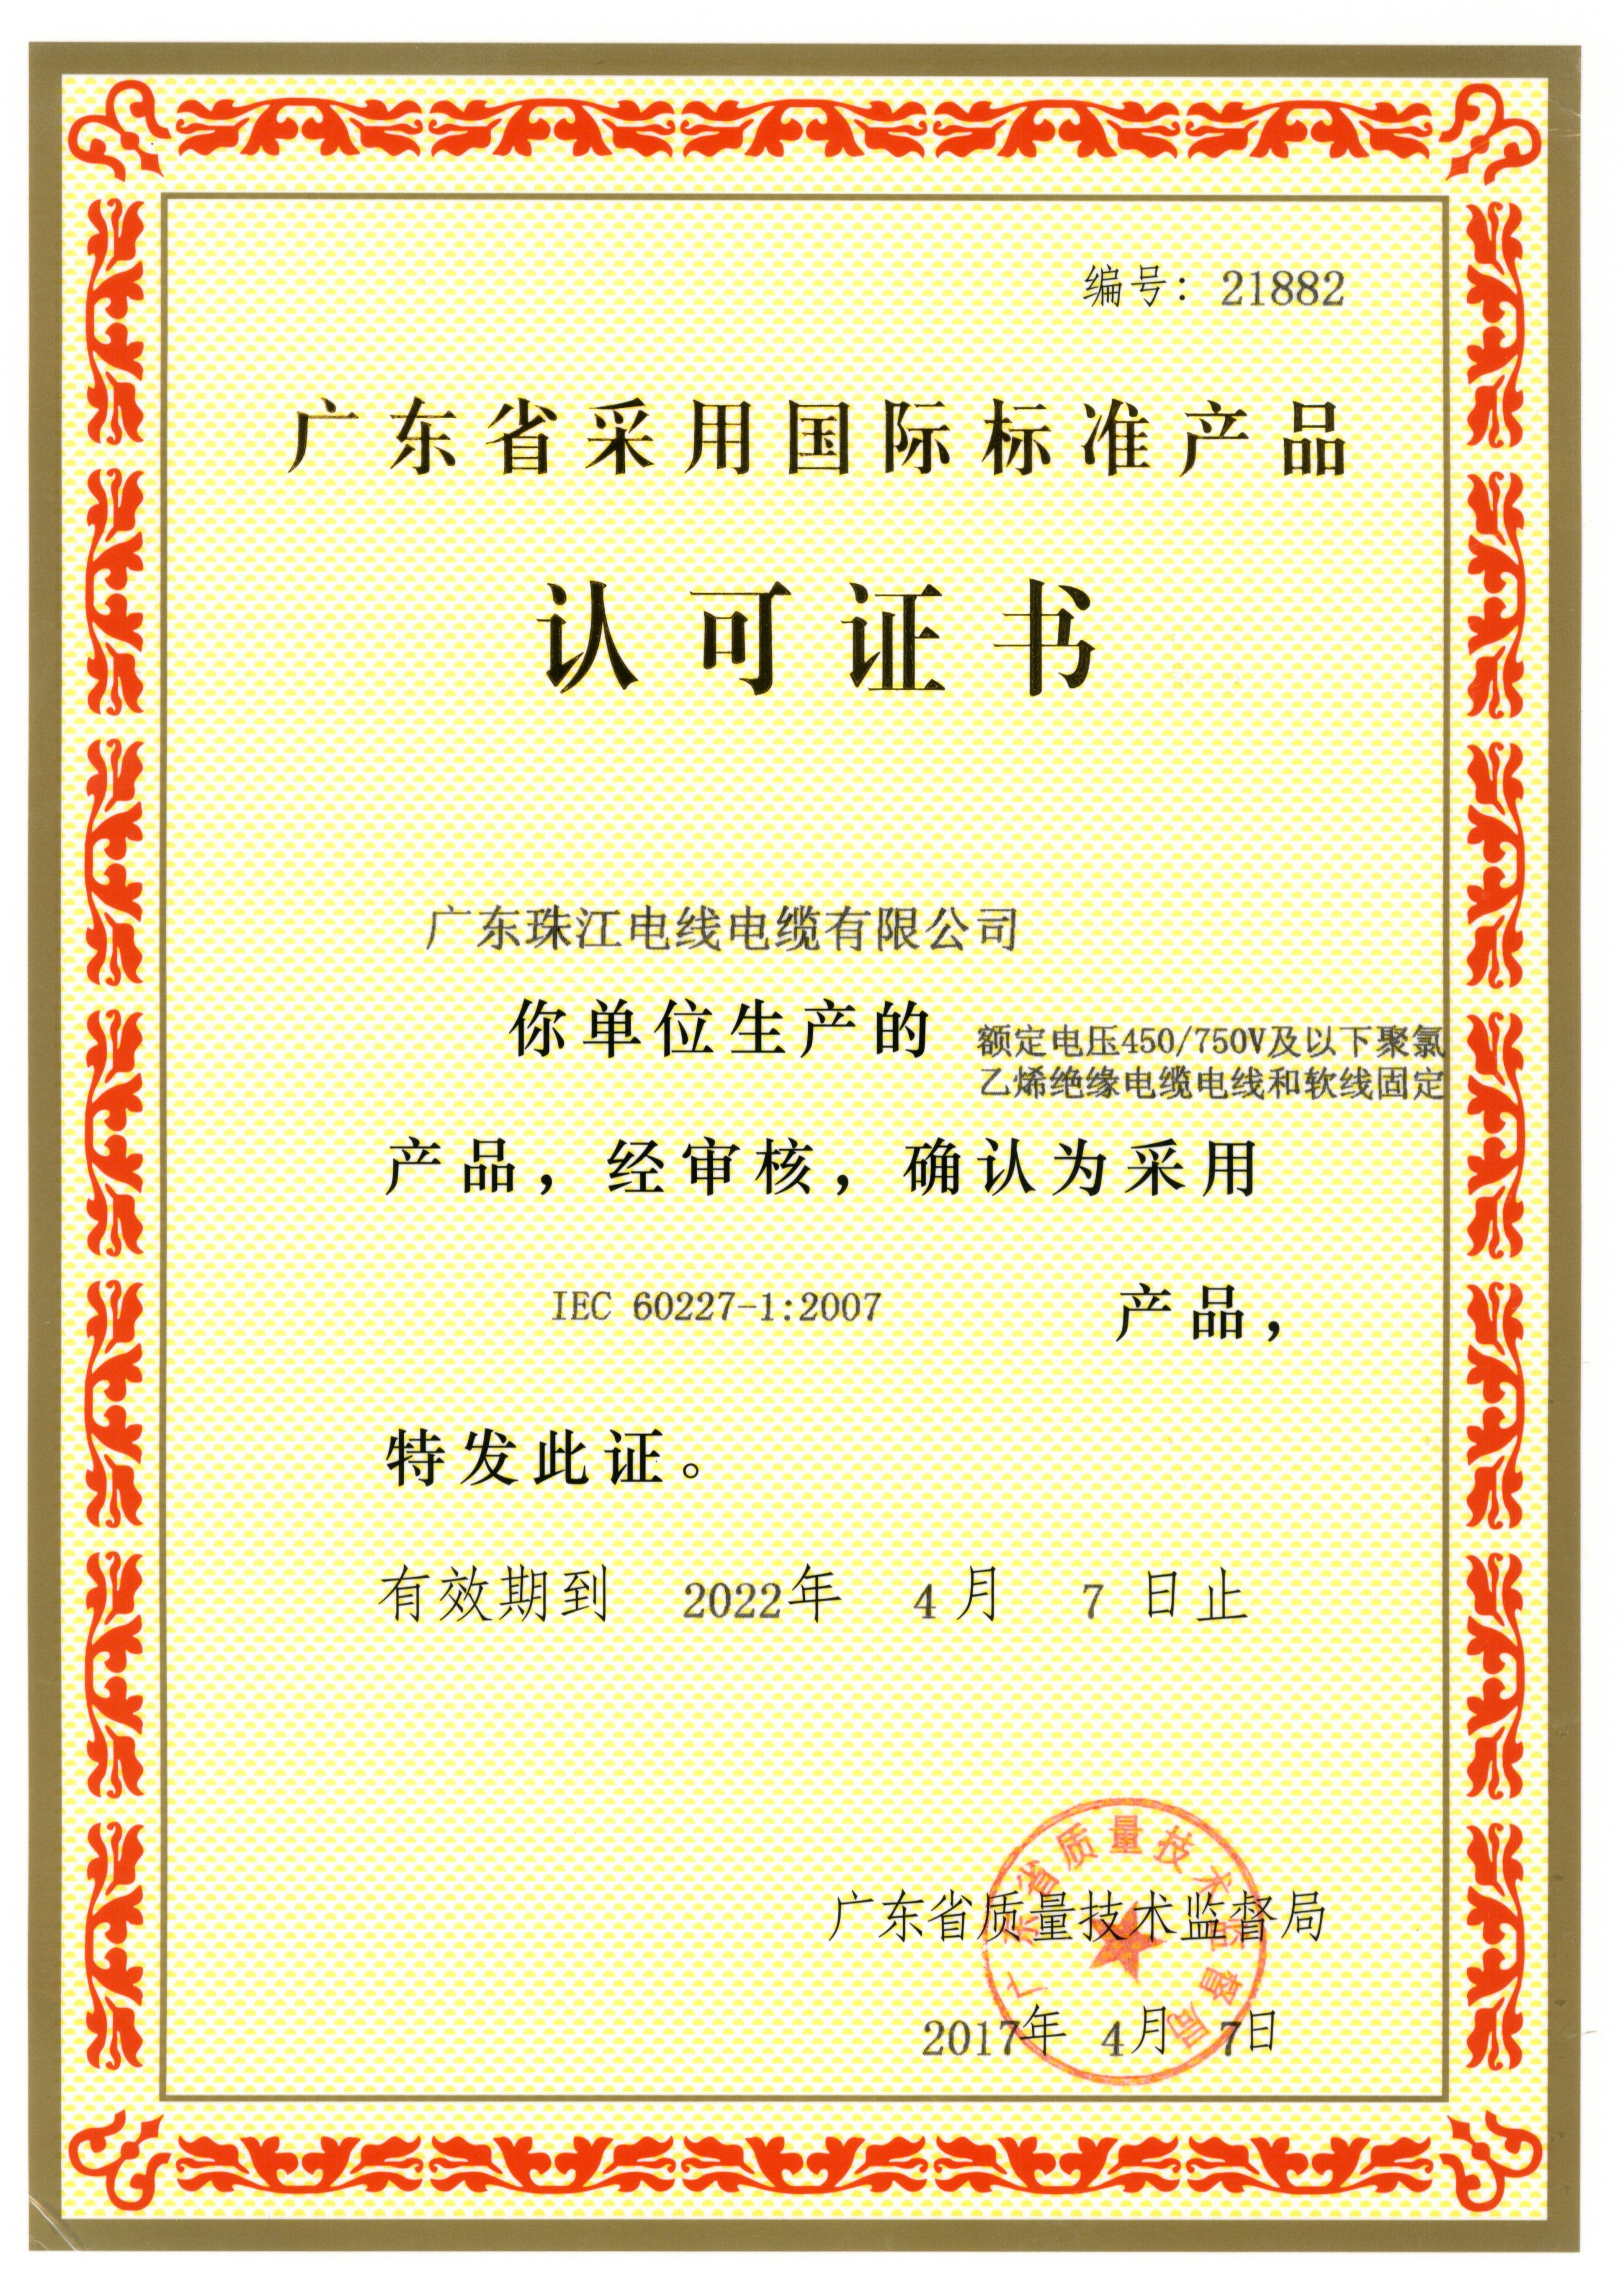 Adopt national standard product recognition certificate (882)